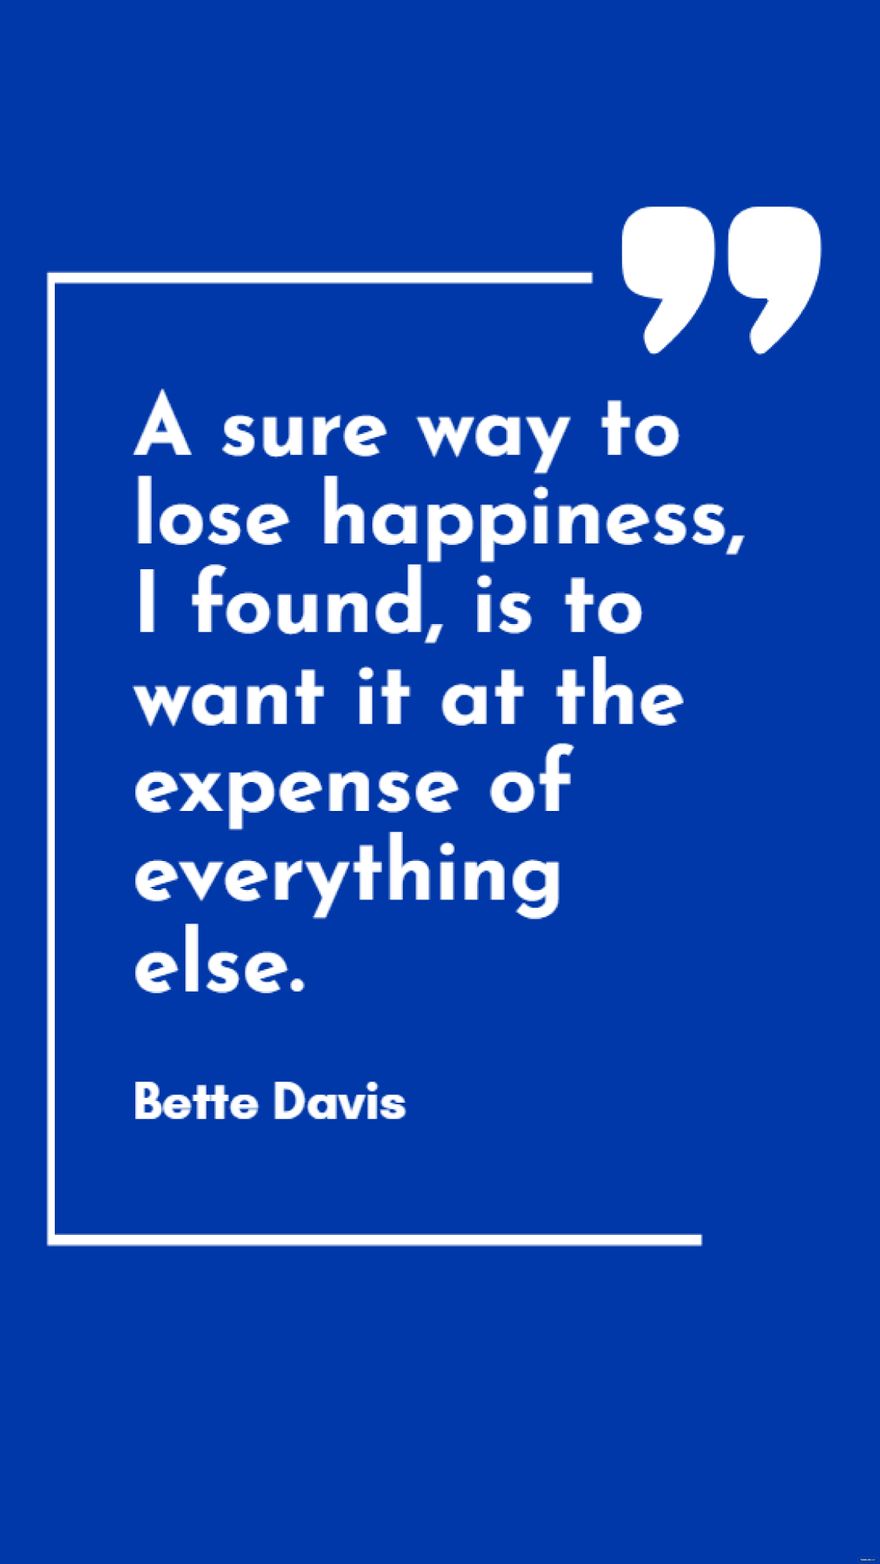 Free Bette Davis - A sure way to lose happiness, I found, is to want it at the expense of everything else. in JPG